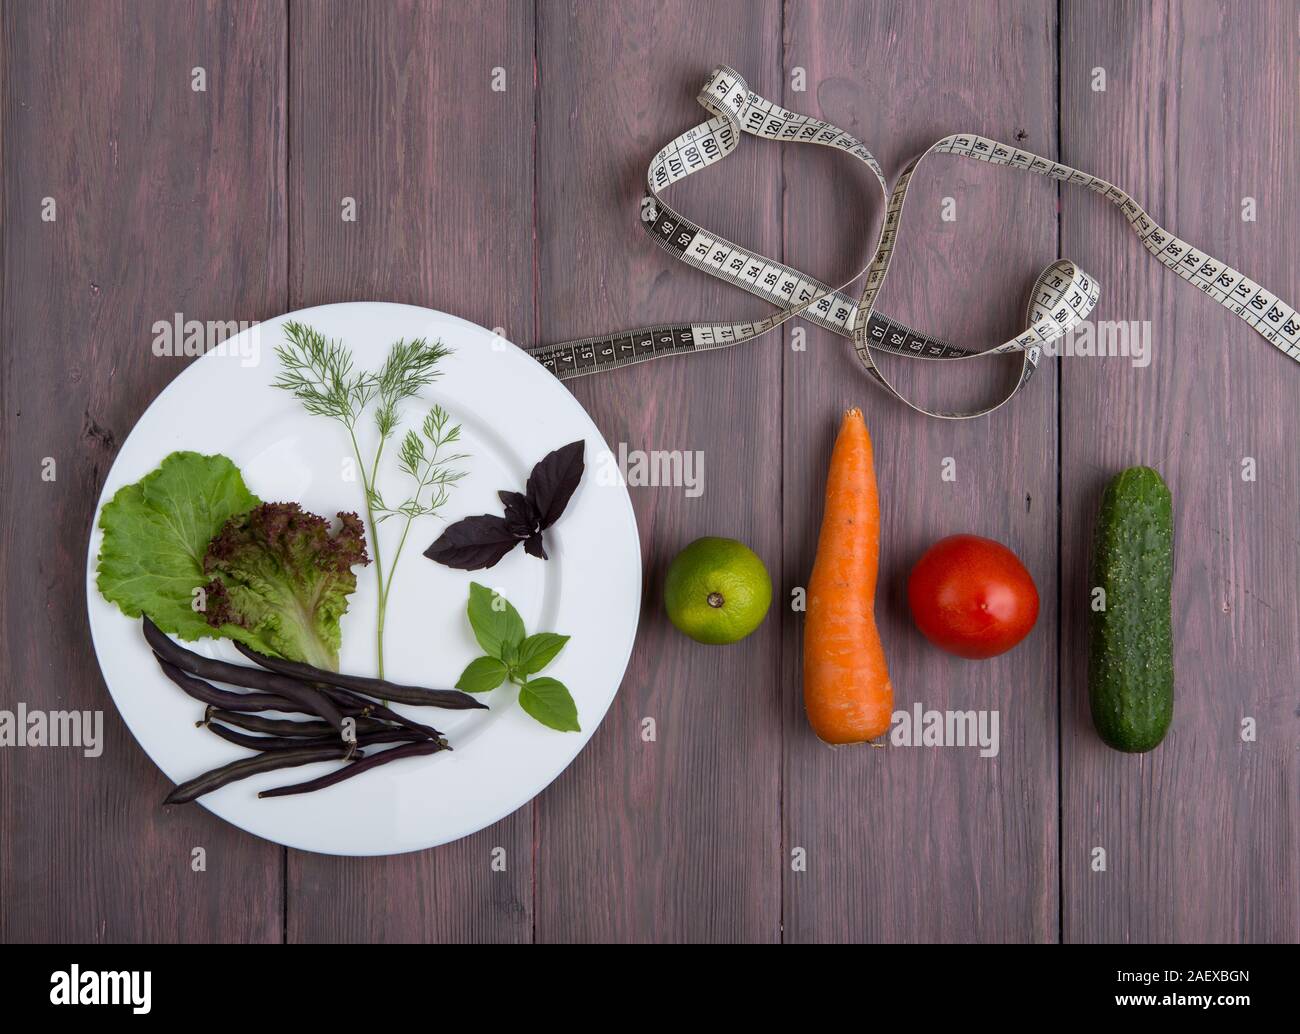 Healthy food and diet vegetarian concept - measure tape, white plate with leaf of salad, cucumber, tomato and other vegetables on wooden table Stock Photo